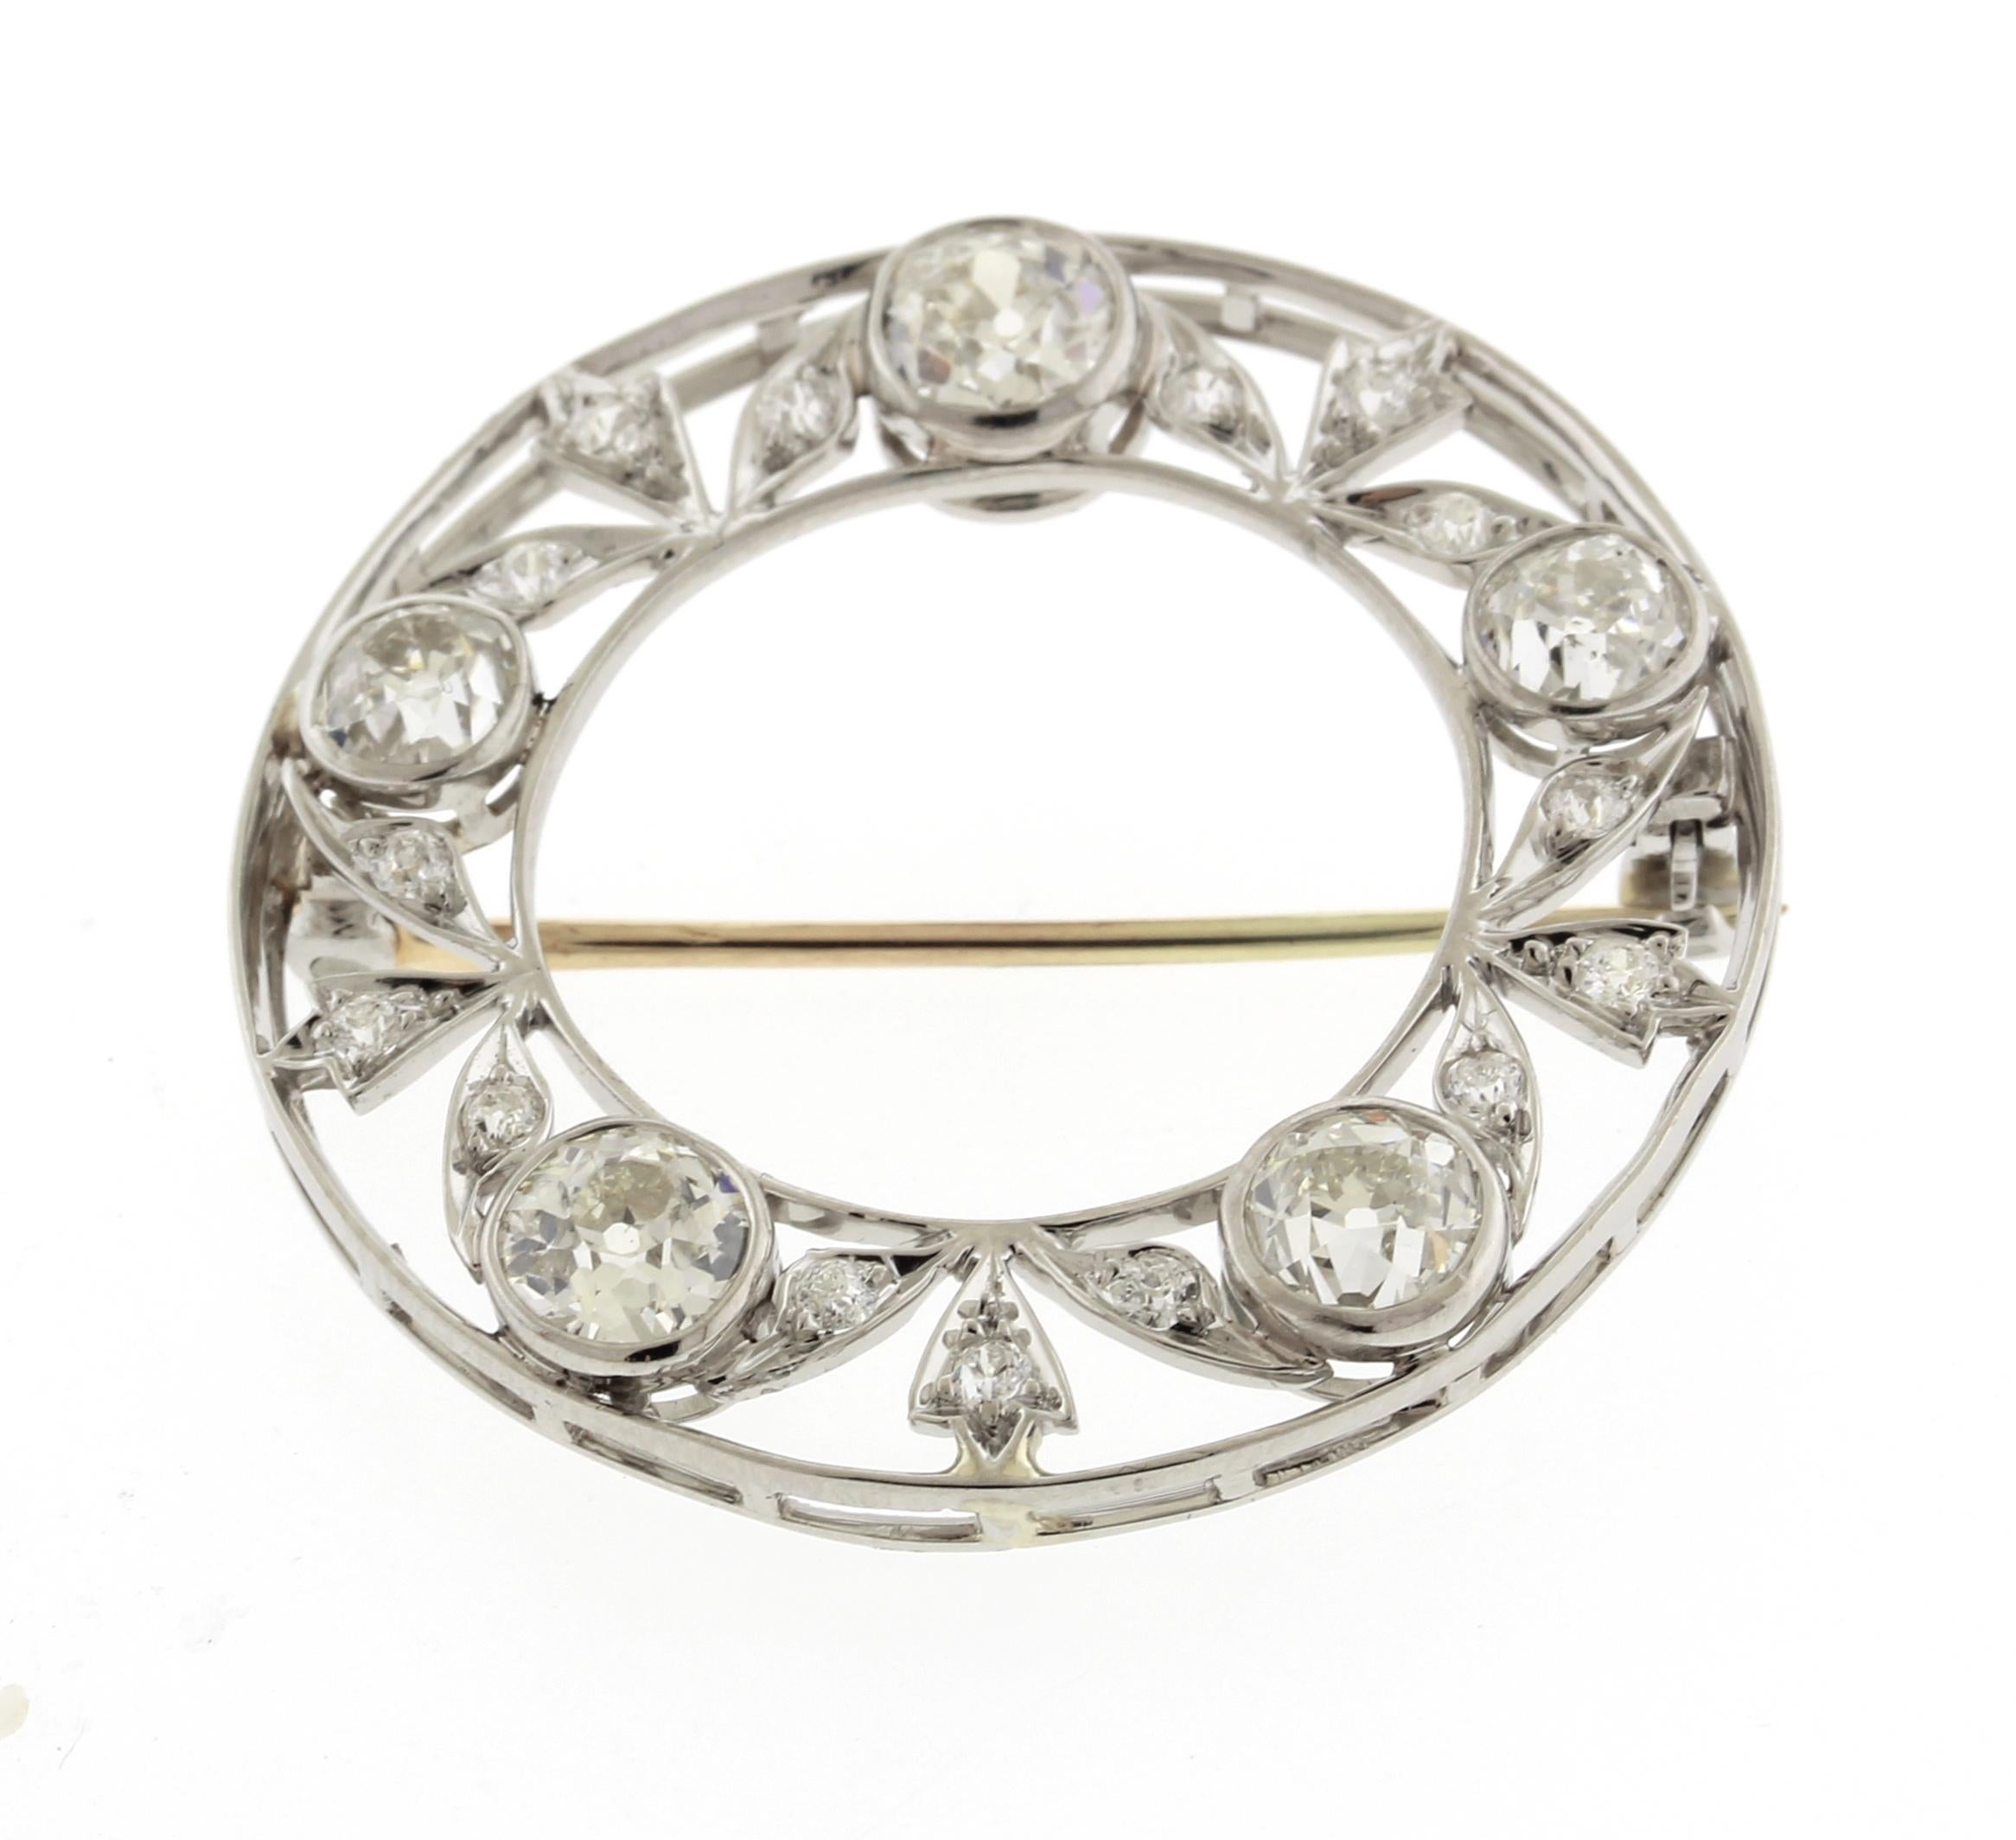 This Edwardian brooch is easy to wear with any outfit.  
• Metal: Platinum
• Circa: 1910s
• Gemstone: Diamonds
• Diamonds: 5 OEC/OMC =approximately 2 cts
                     15 smaller diamonds= .15cts
• Diameter: 1 1/4inches
• Weight: 7.6 grams
•